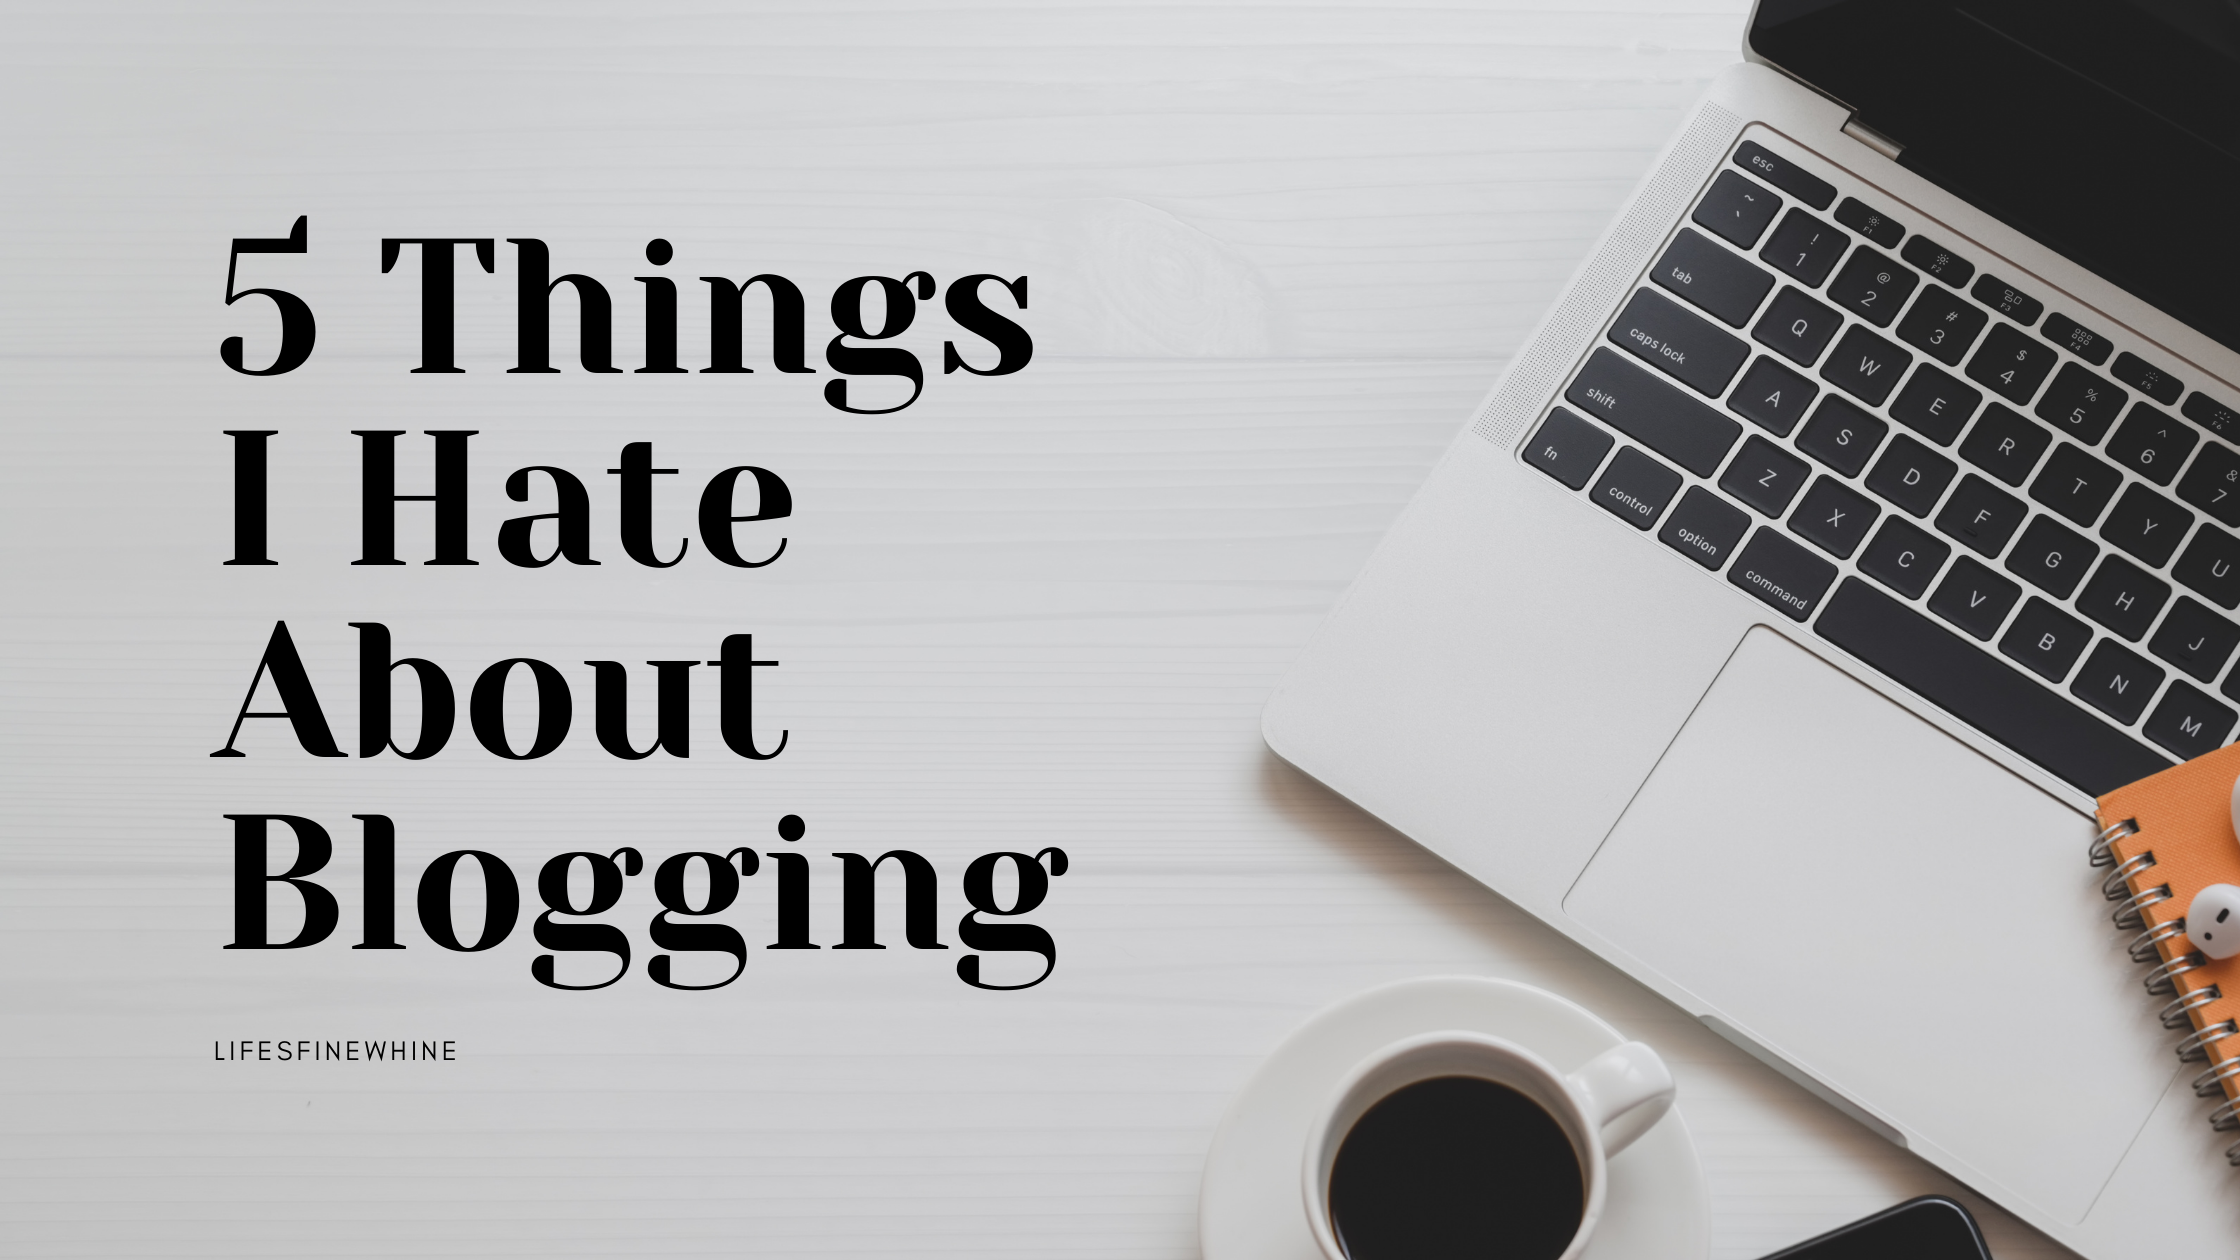 Things I Hate About Blogging